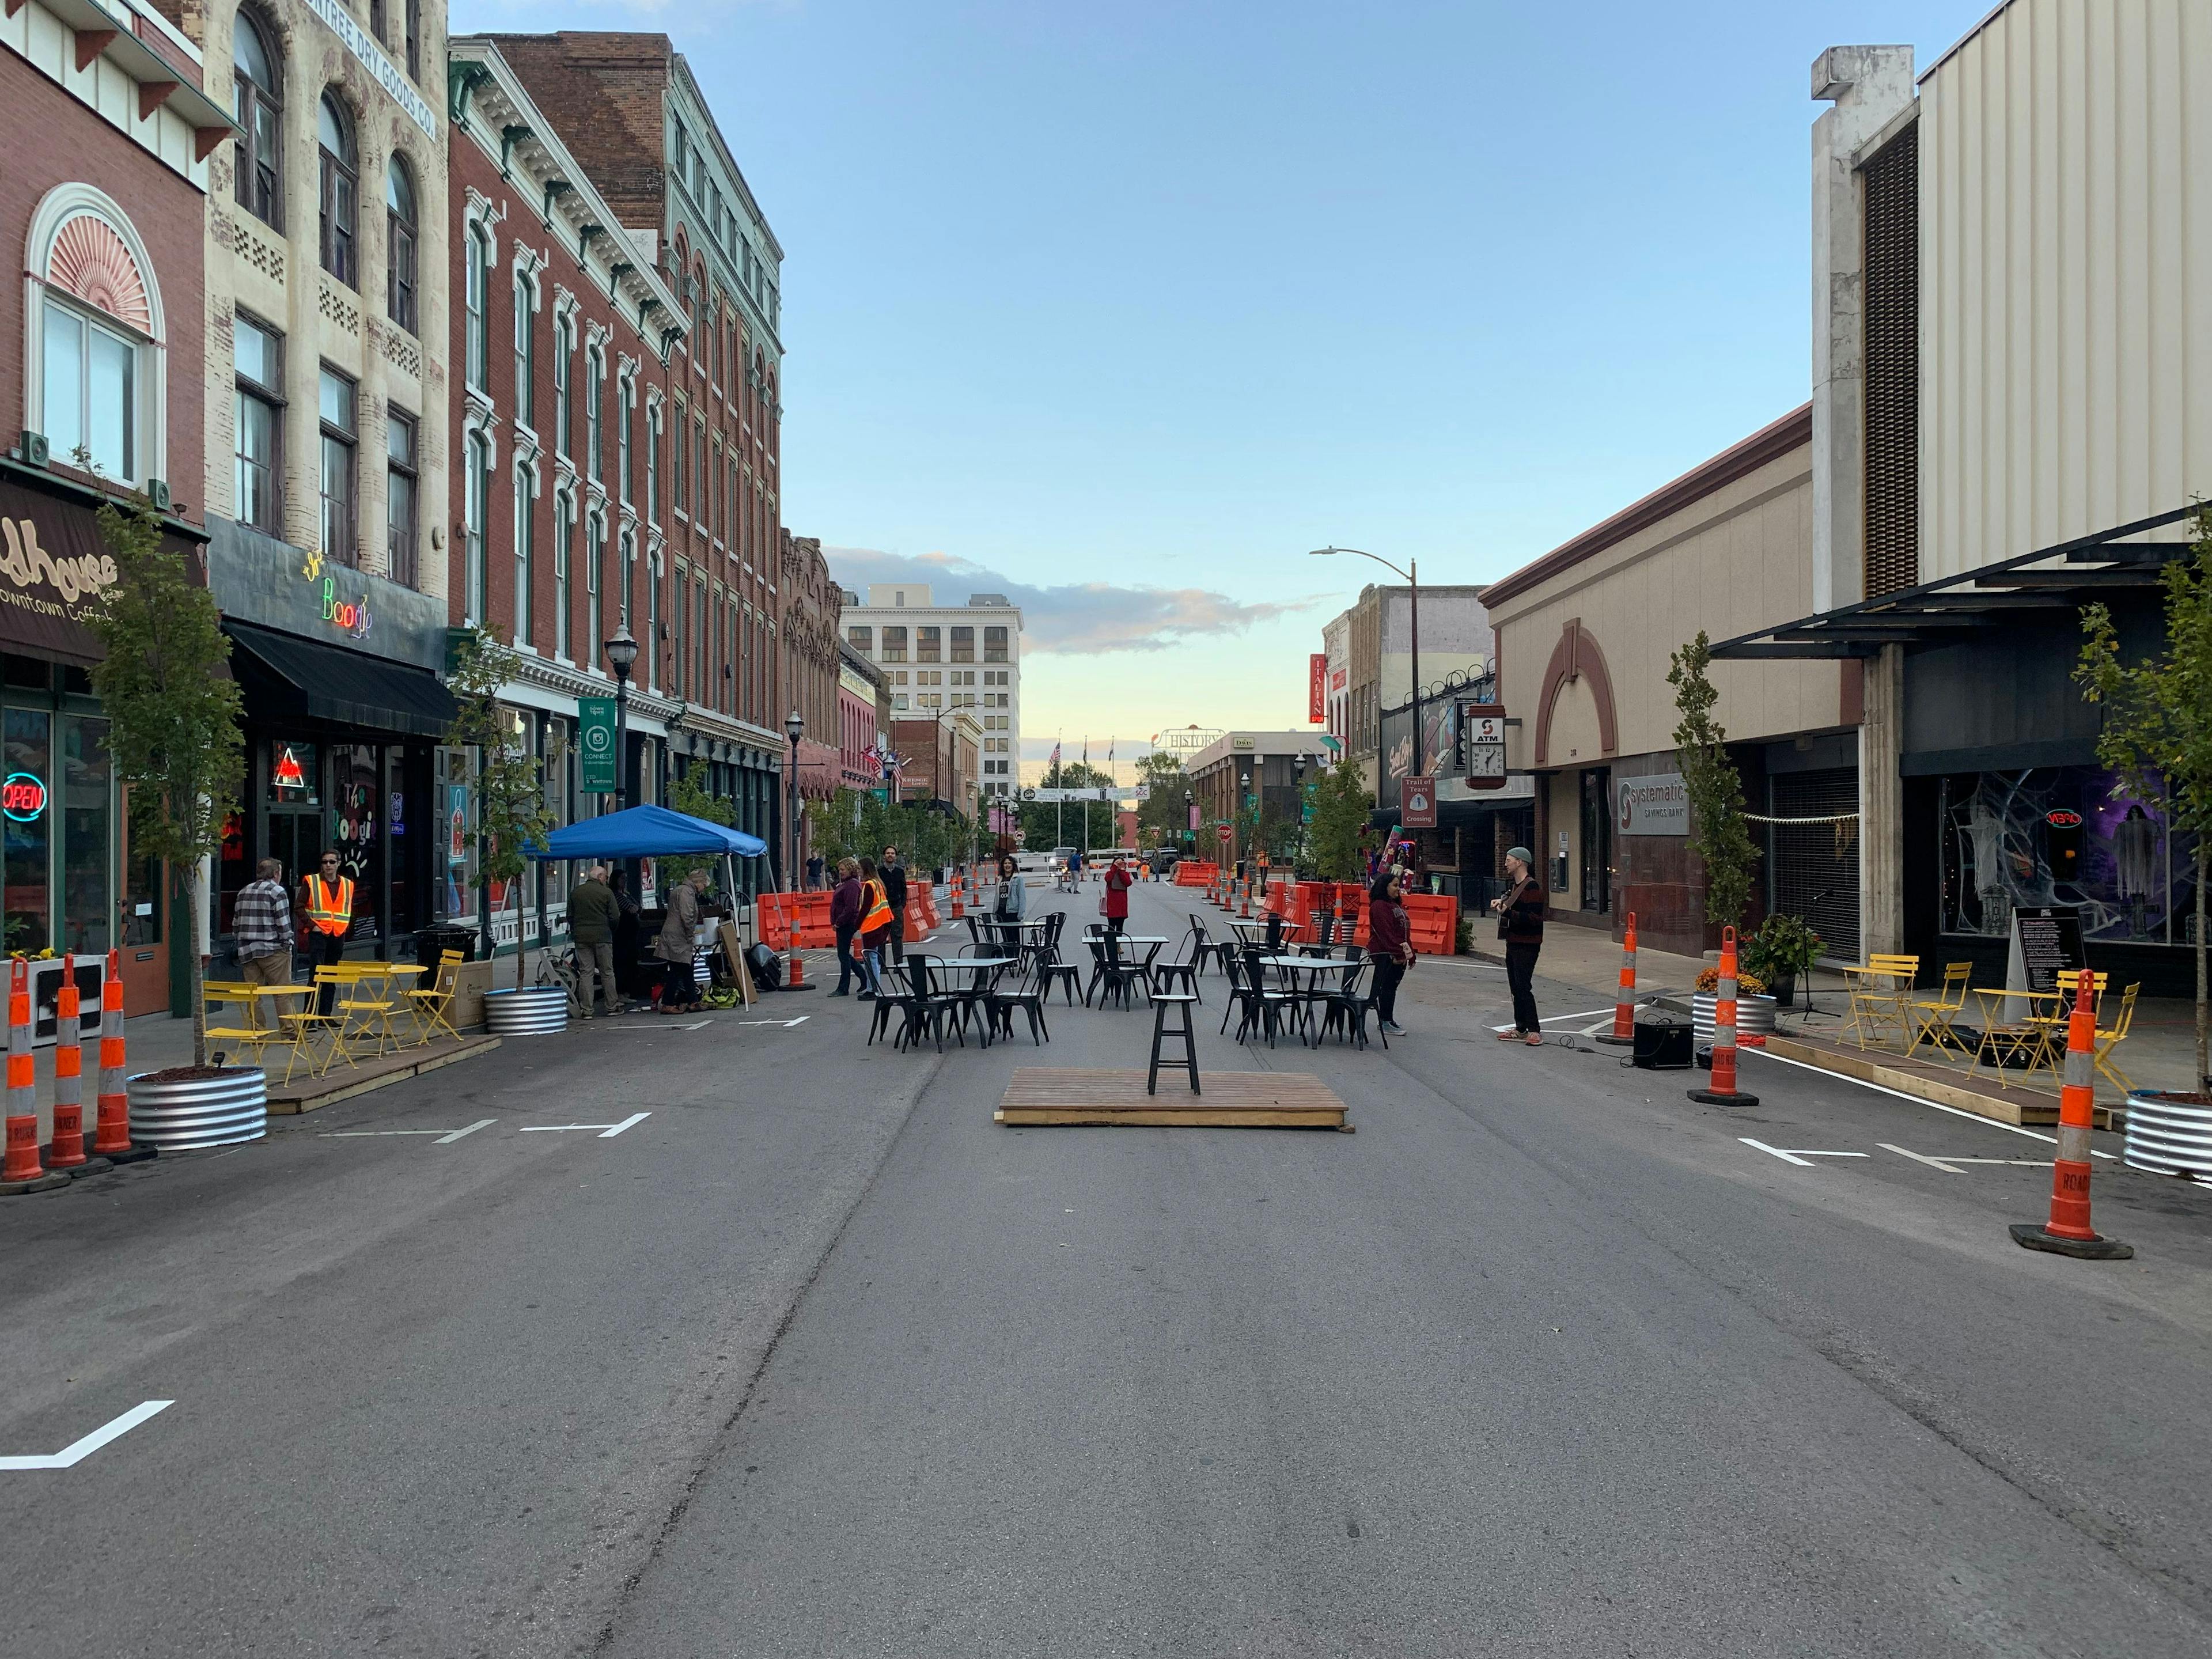 Image of South Avenue with workers setting up the street for the South Avenue Project.